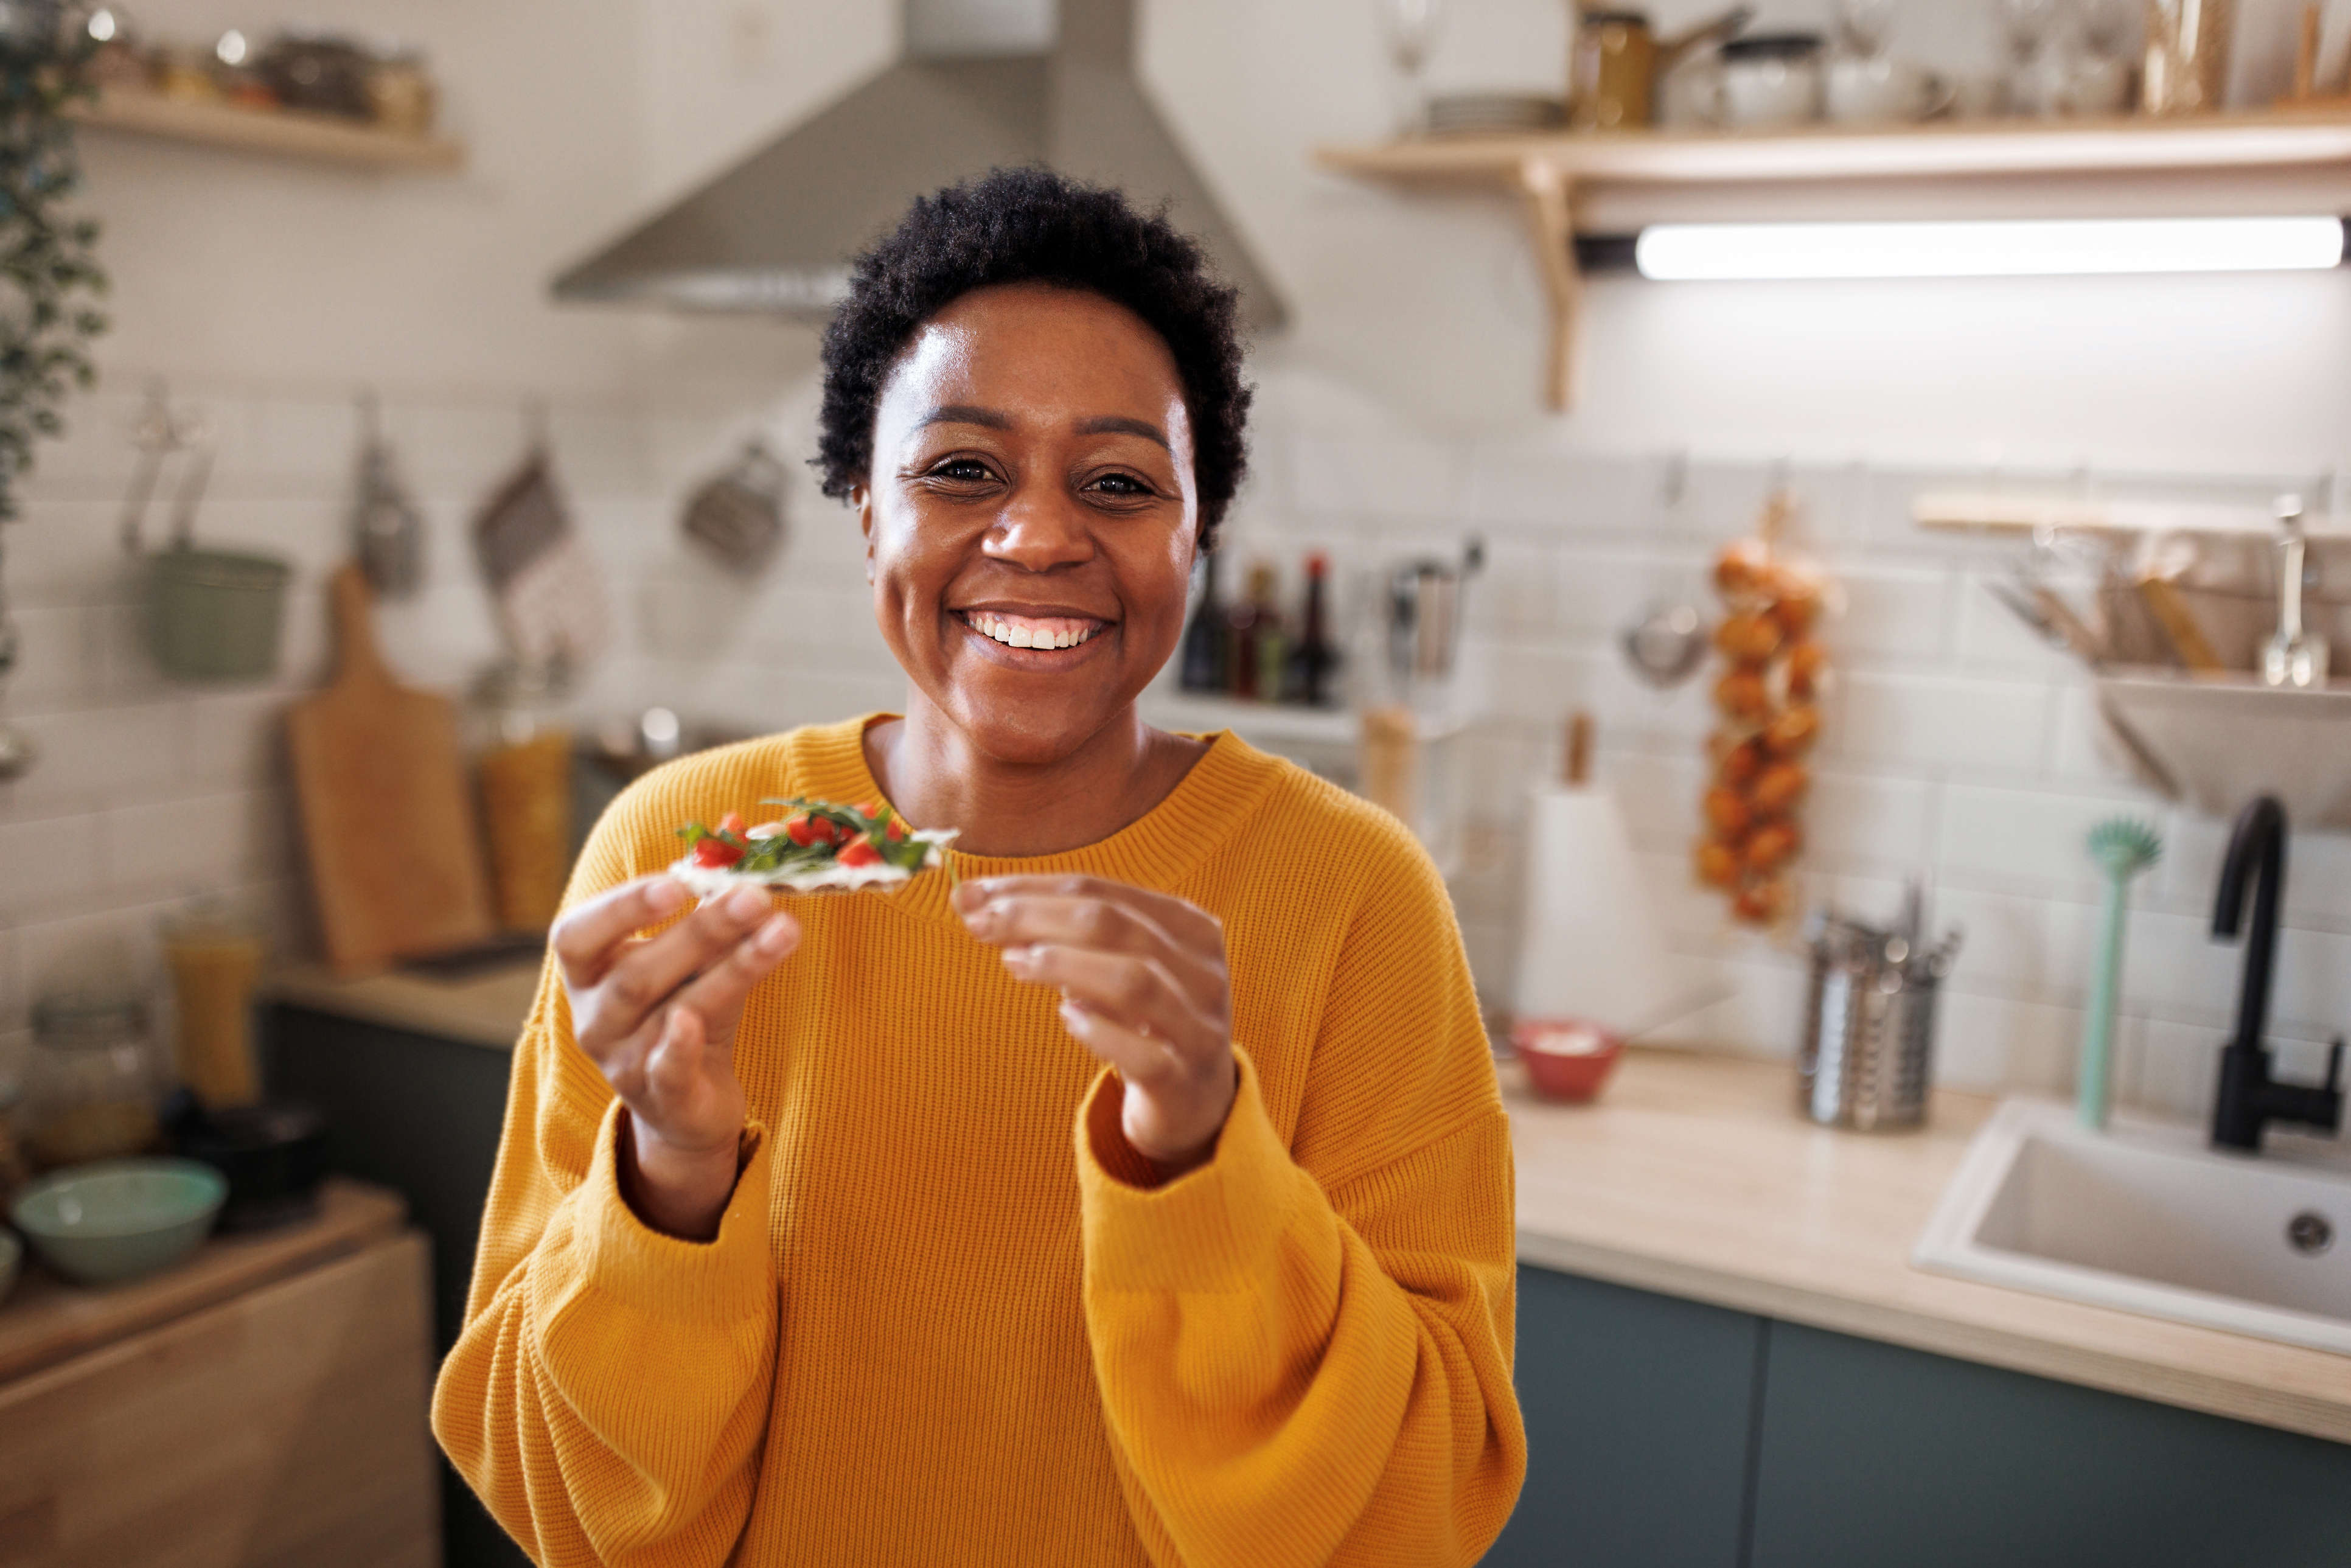 A woman eating some heathy snacks in her kitchen